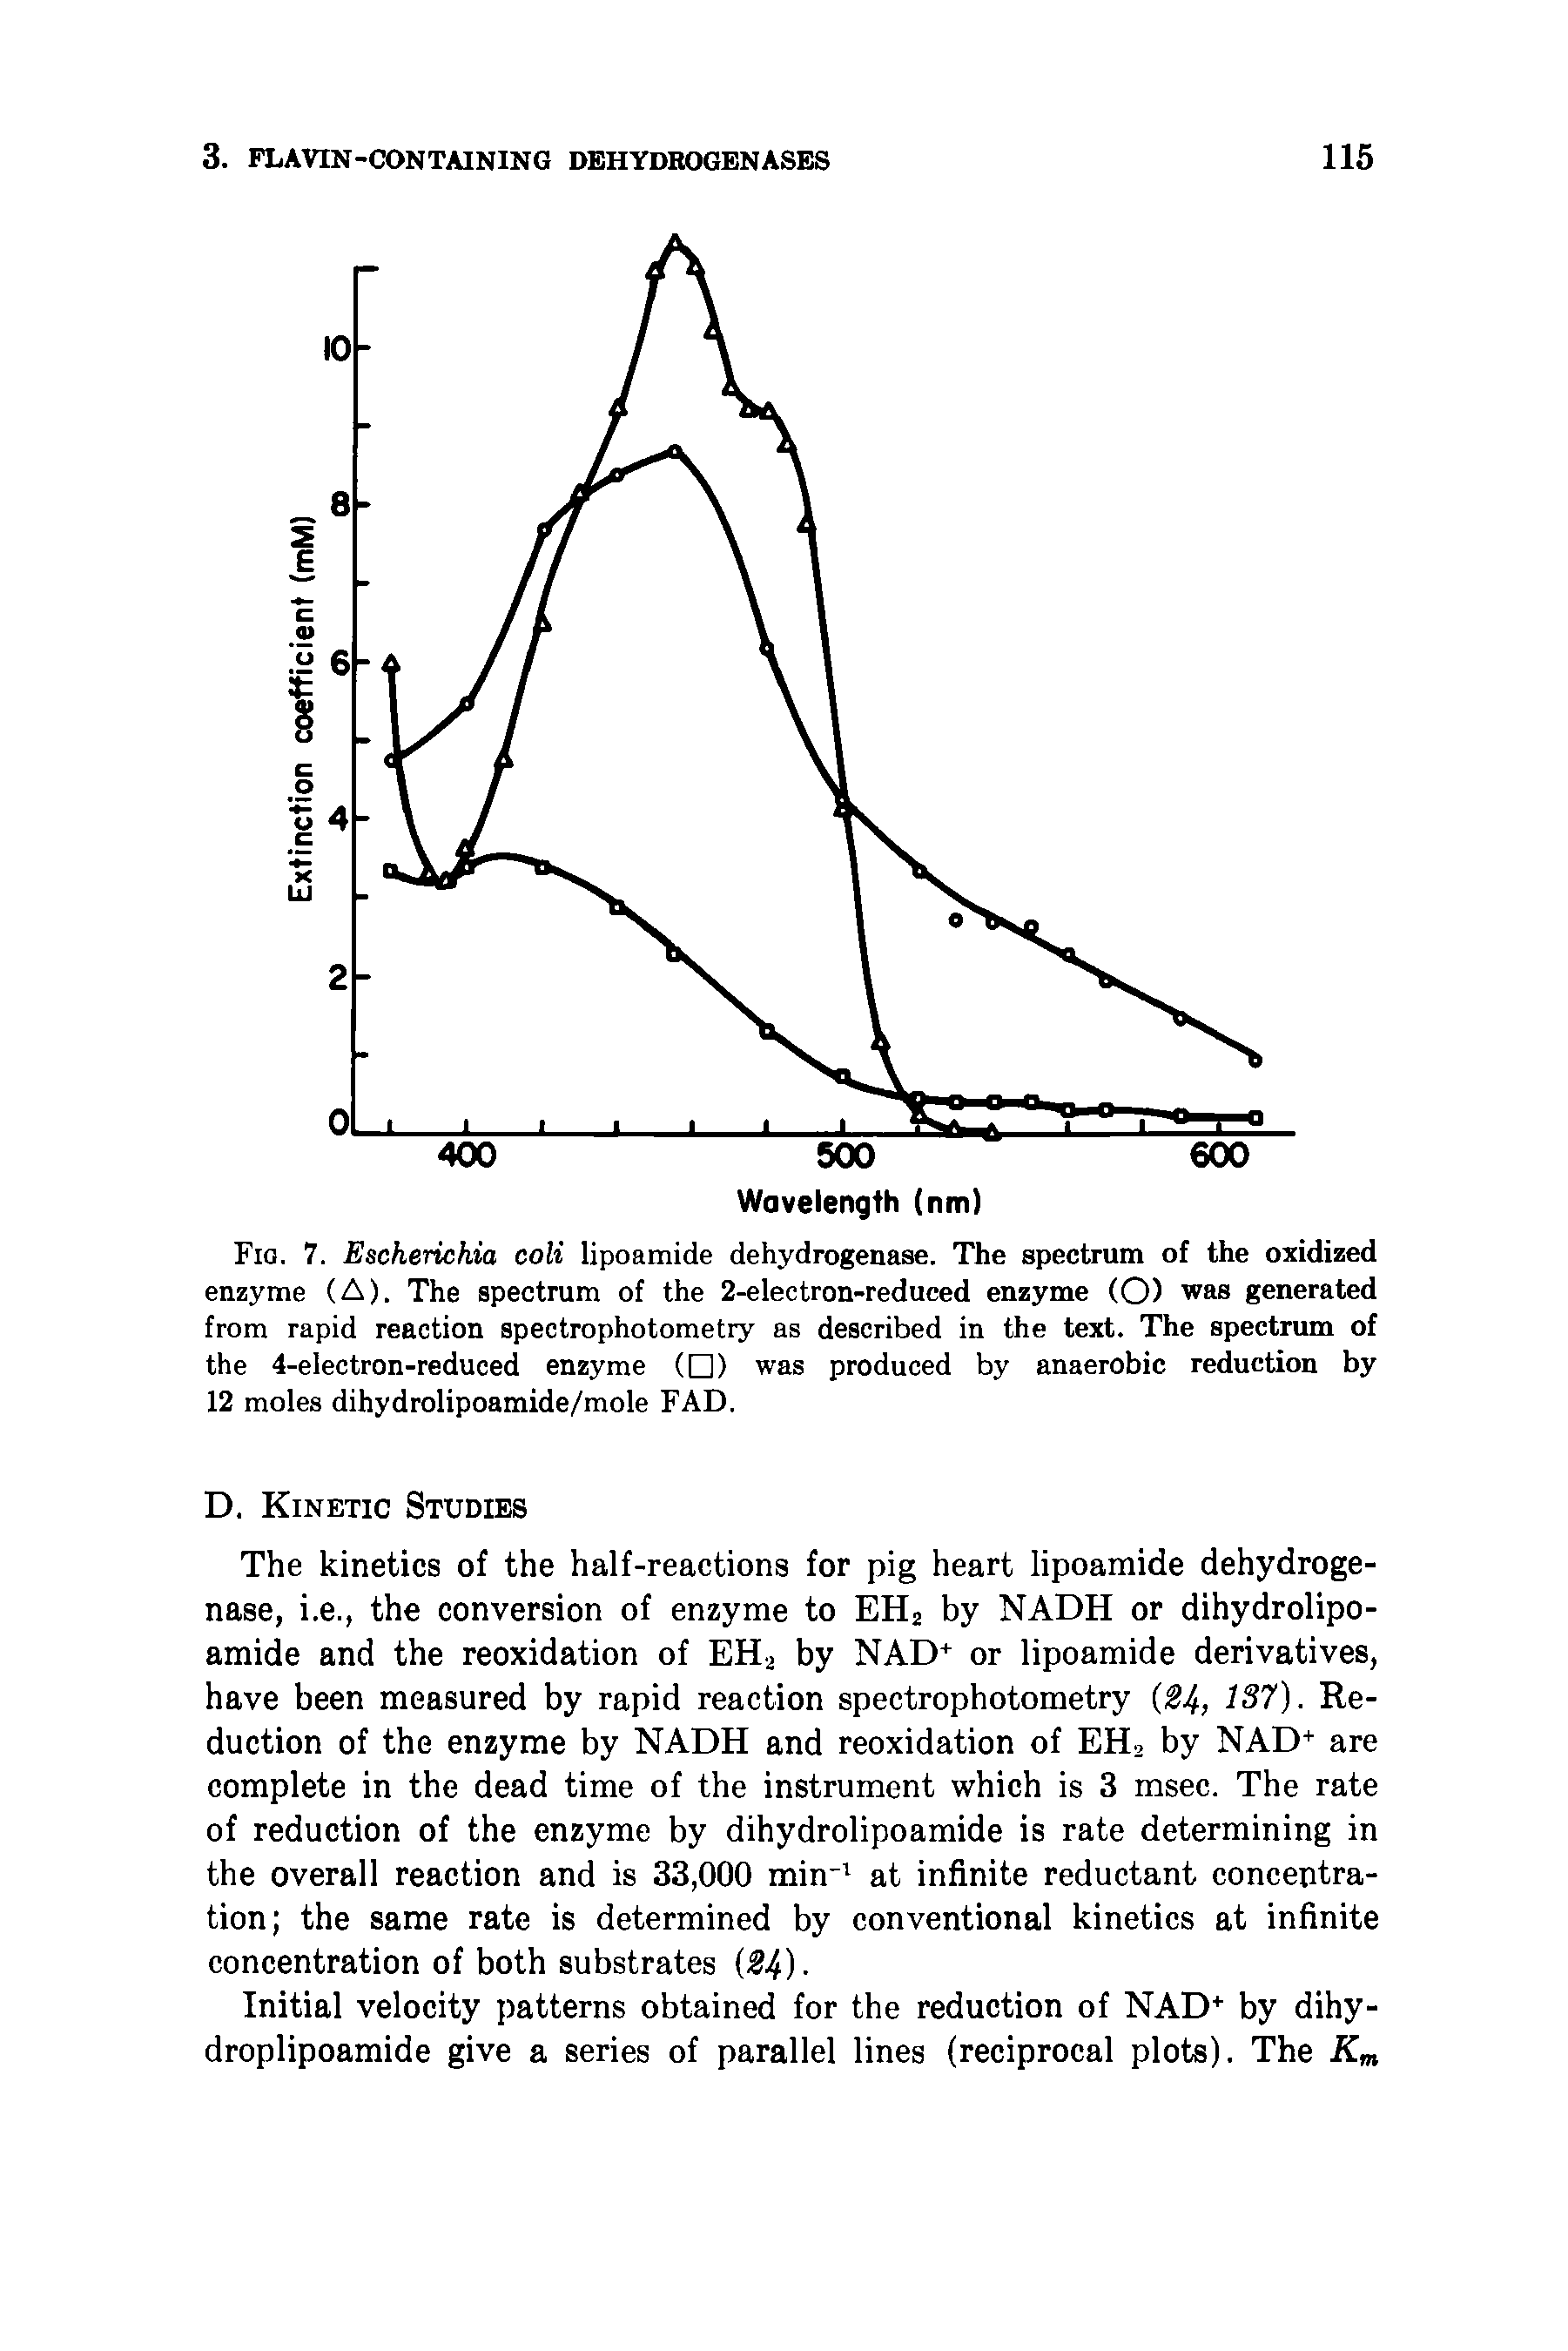 Fig. 7. Escherichia coli lipoatnide dehydrogenase. The spectrum of the oxidized enzyme (A). The spectrum of the 2-electron-reduced enzyme (O) was generated from rapid reaction spectrophotometry as described in the text. The spectrum of the 4-electron-reduced enzyme ( ) was produced by anaerobic reduction by 12 moles dihydrolipoamide/mole FAD.